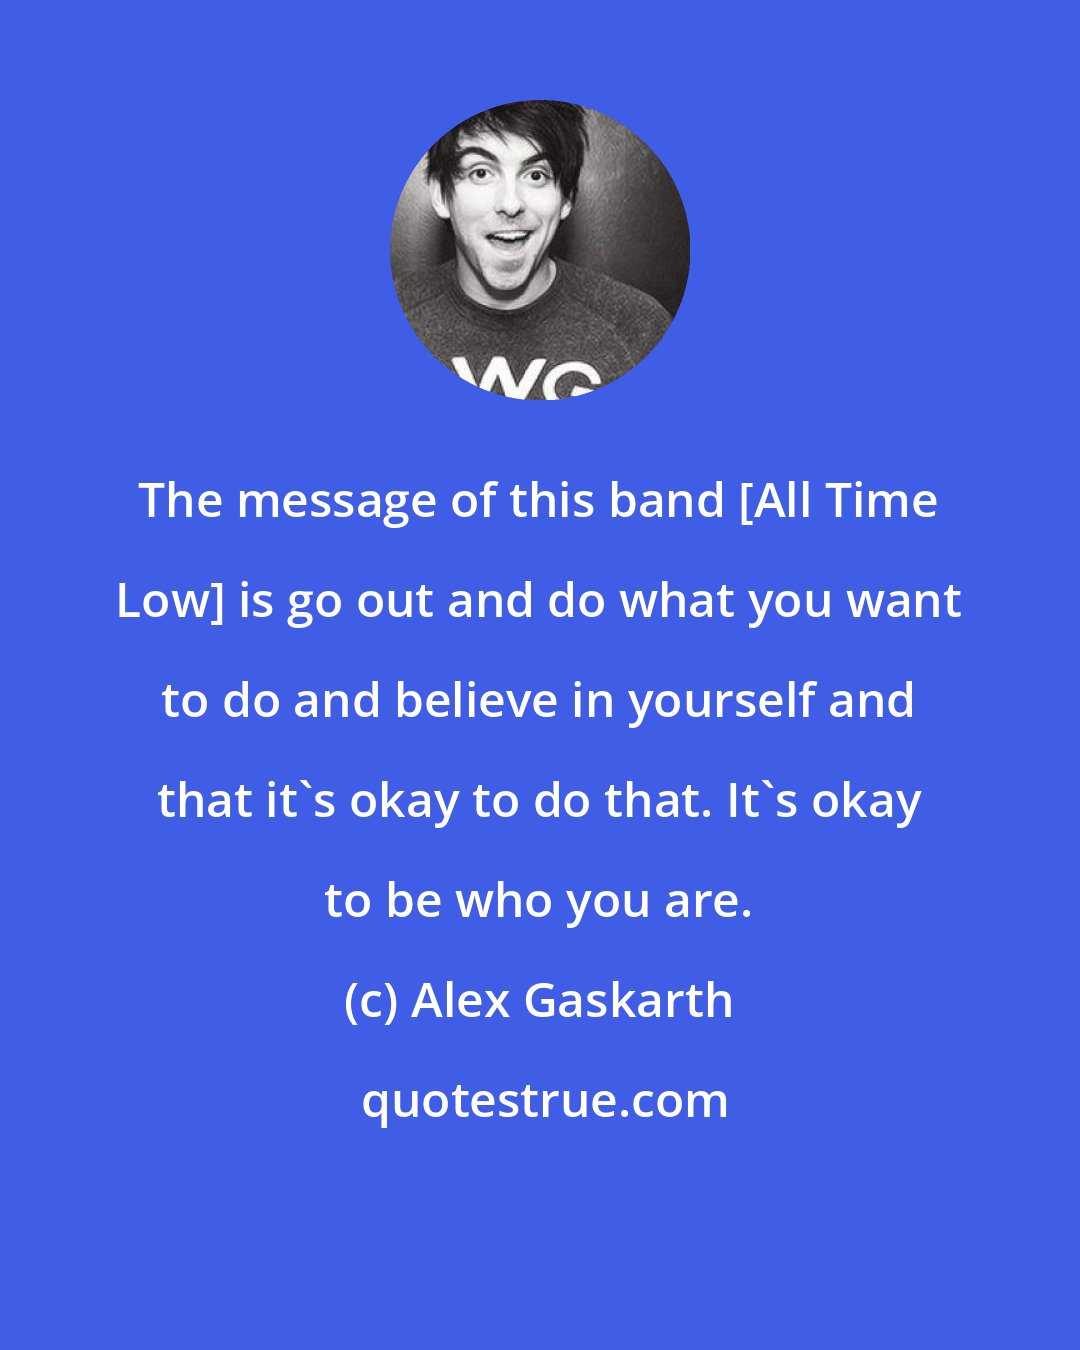 Alex Gaskarth: The message of this band [All Time Low] is go out and do what you want to do and believe in yourself and that it's okay to do that. It's okay to be who you are.